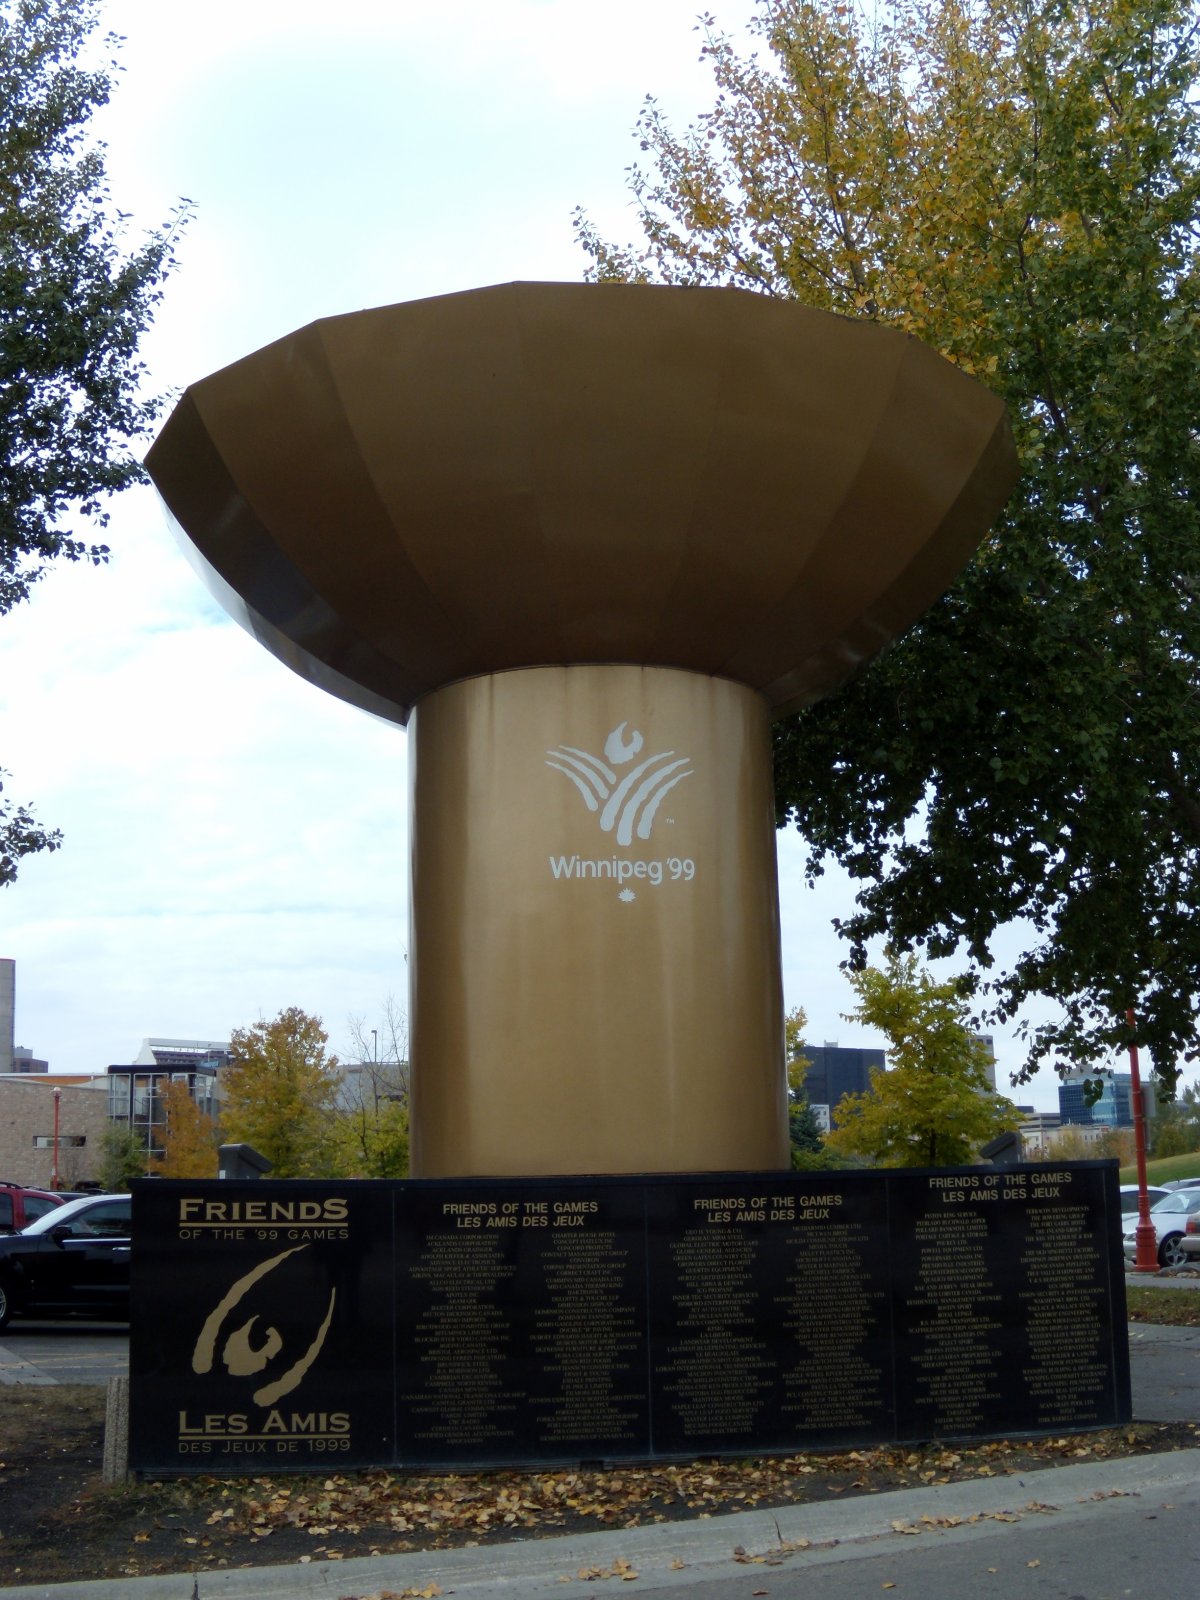 Winnipeg's Pan Am Games torch at The Forks.